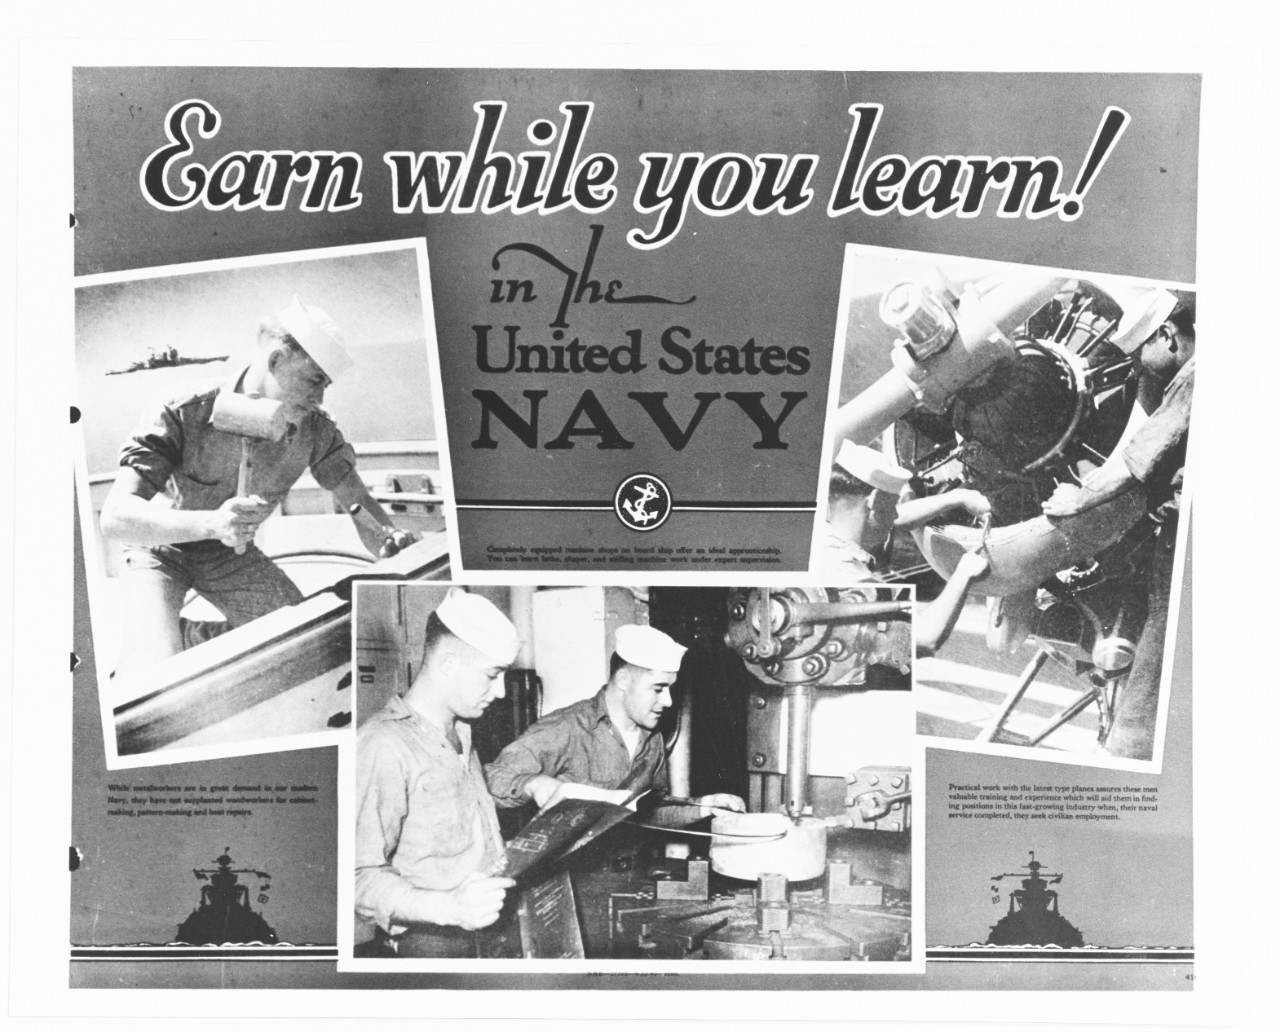 Navy poster, "Earn while you learn!"